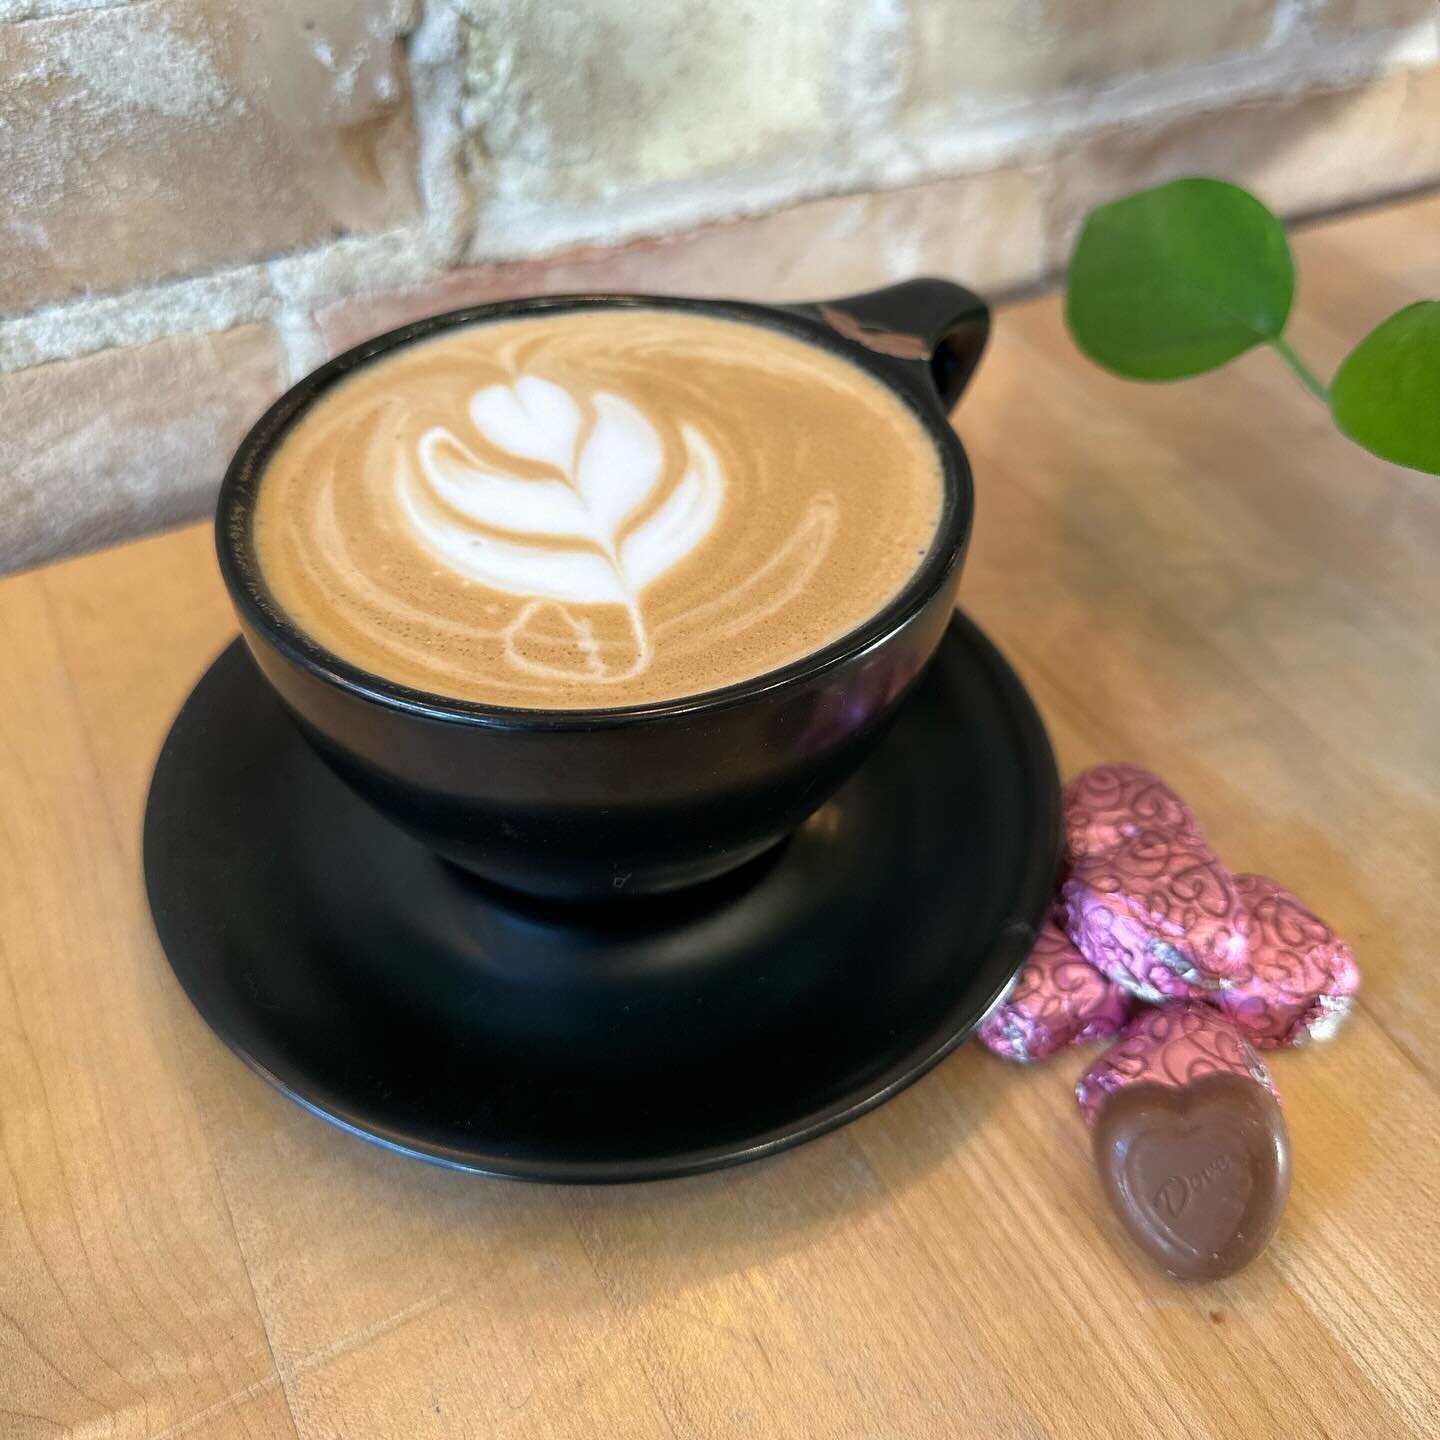 .
💕💕Happy Valentine&rsquo;s Day💕💕
We crafted a lovely Mocha today with our limited Chocolate Ruby Syrup and hint of Coconut! Grab someone you love and stop in! Cheers 🫶

@notneutral @northperkcoffee @1883syrups @downtownpetoskey #northperkcoffee